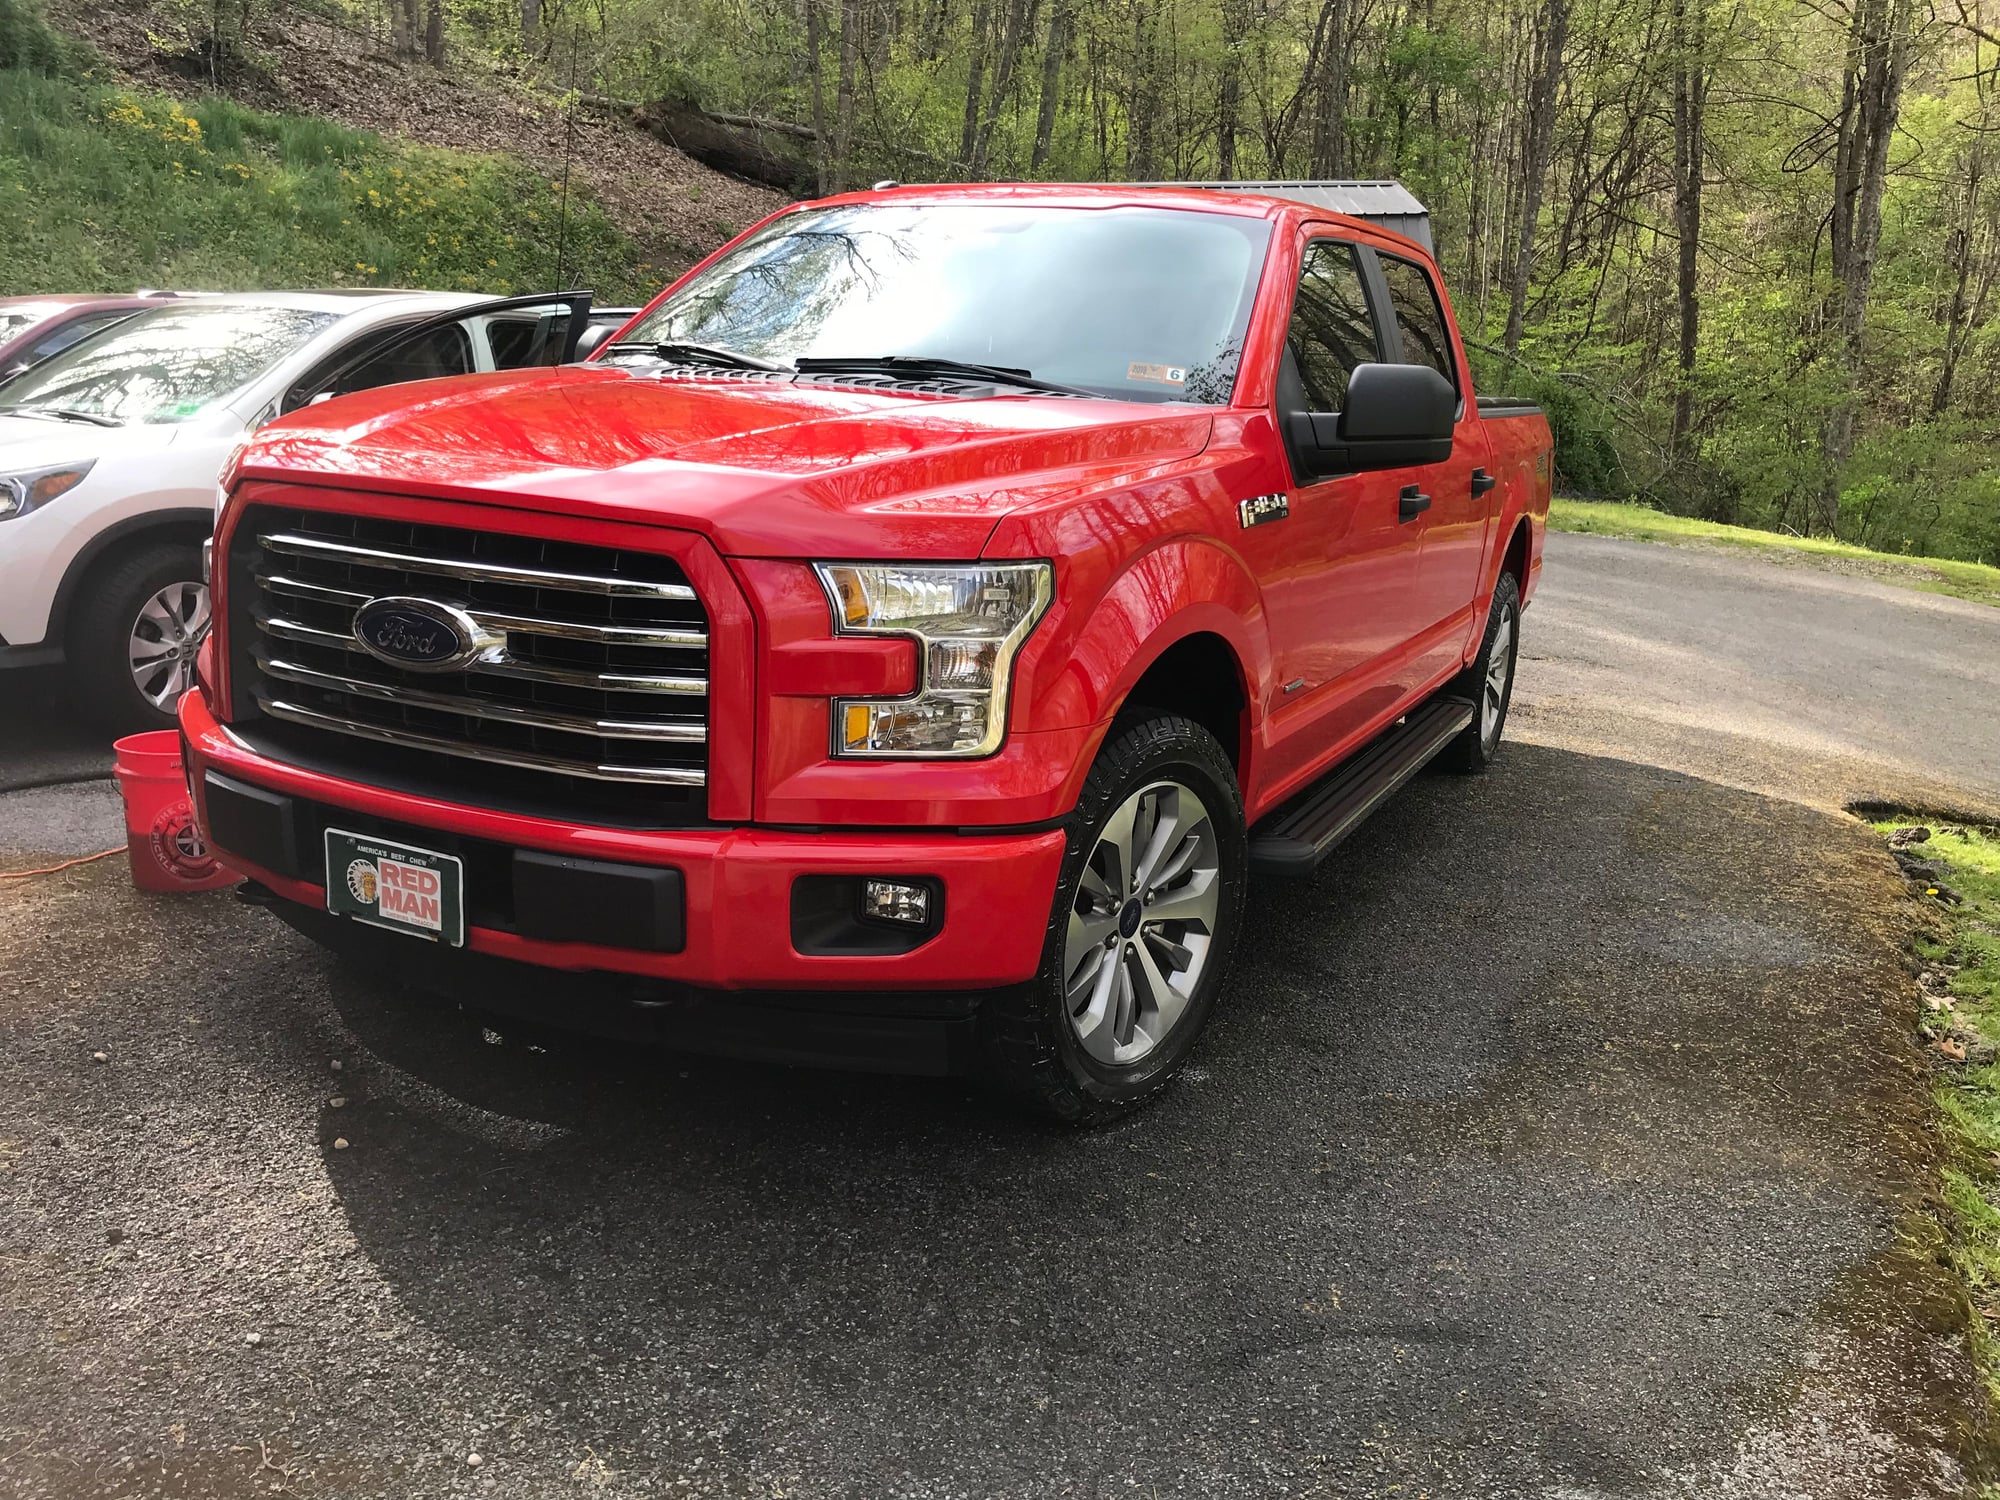 2.7 ecoboost long term updates - Page 3 - Ford F150 Forum - Community 2016 Ford F 150 2.7 Ecoboost Problems